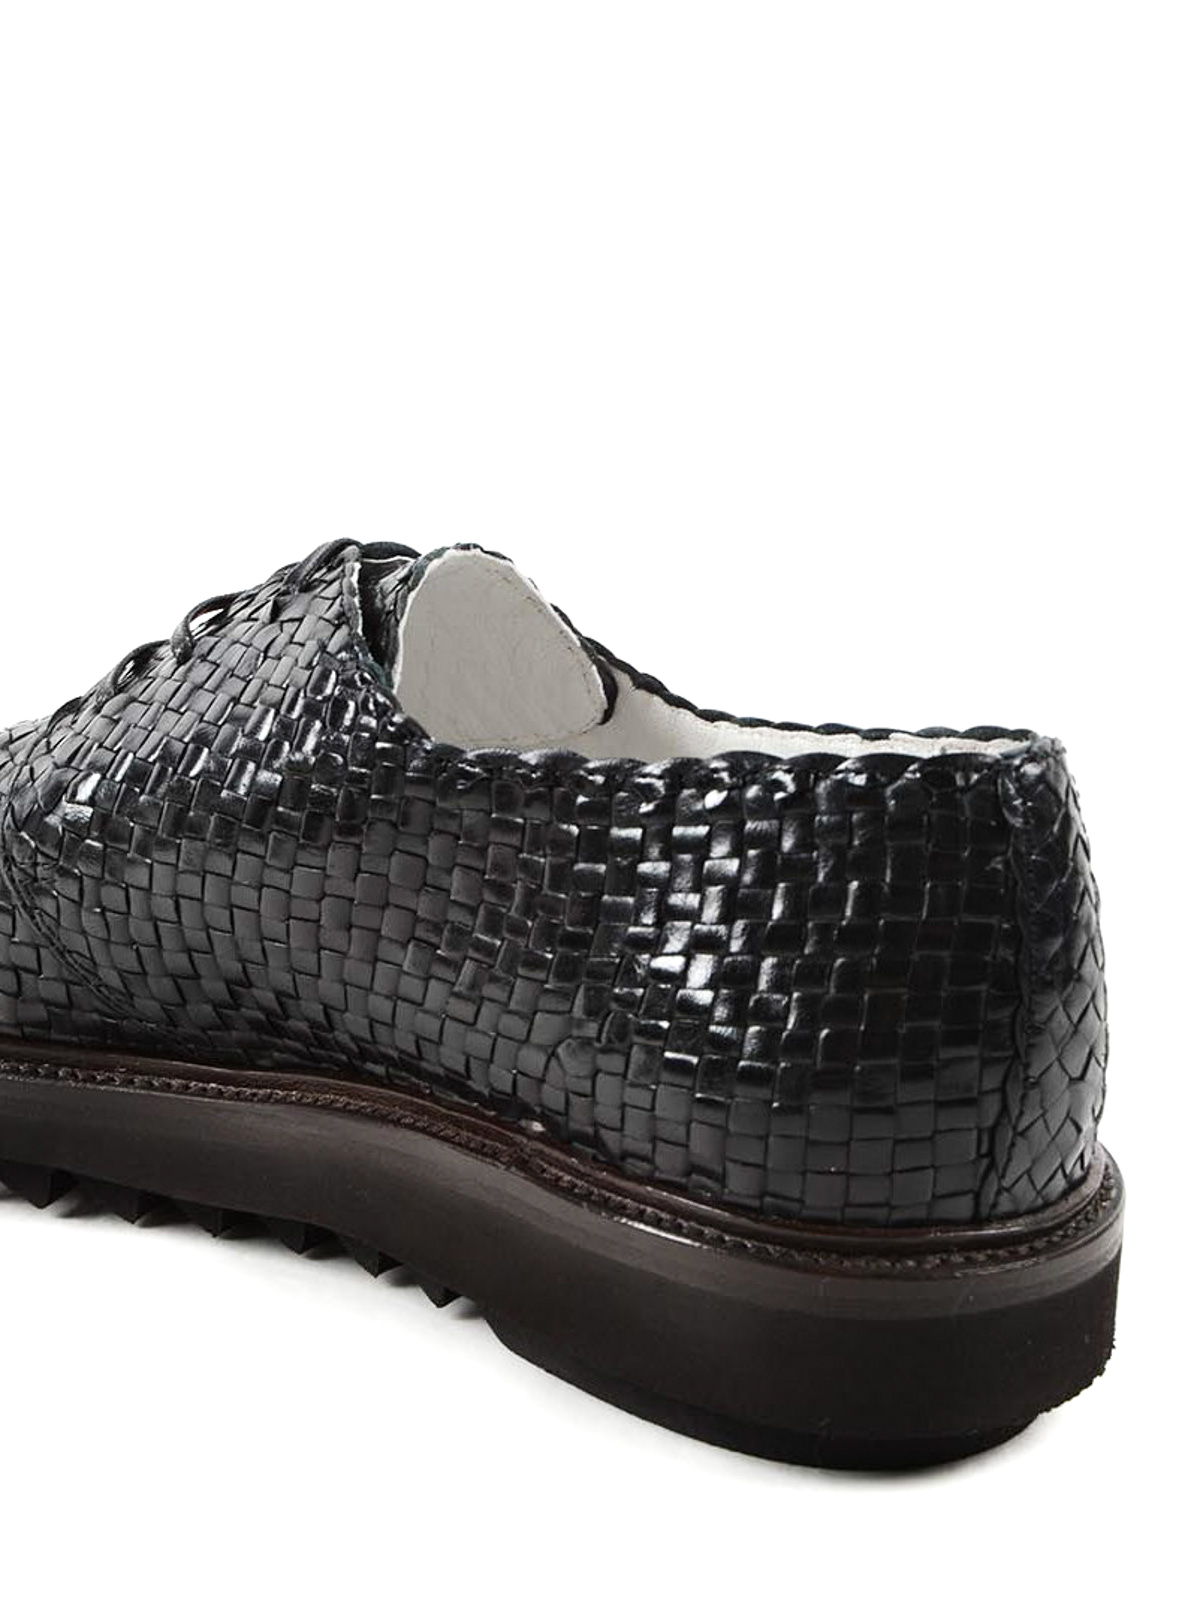 Dolce & Gabbana Leather Lace-up Shoes in Black for Men Mens Shoes Lace-ups Brogues 